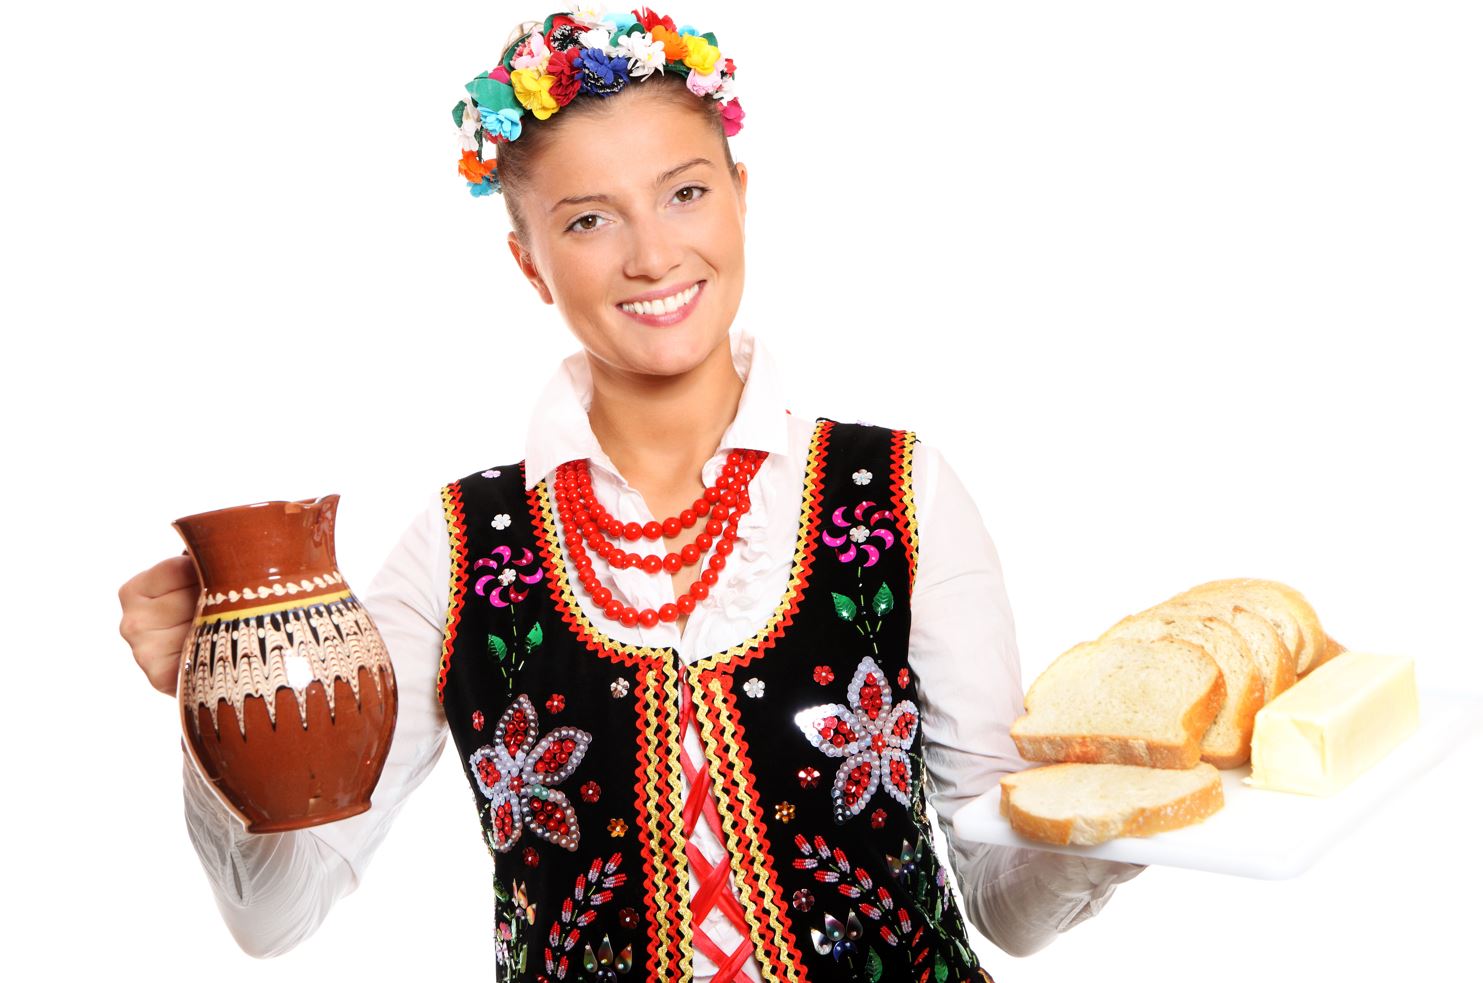 Polish female in Poland’s traditional outfit looks really tall